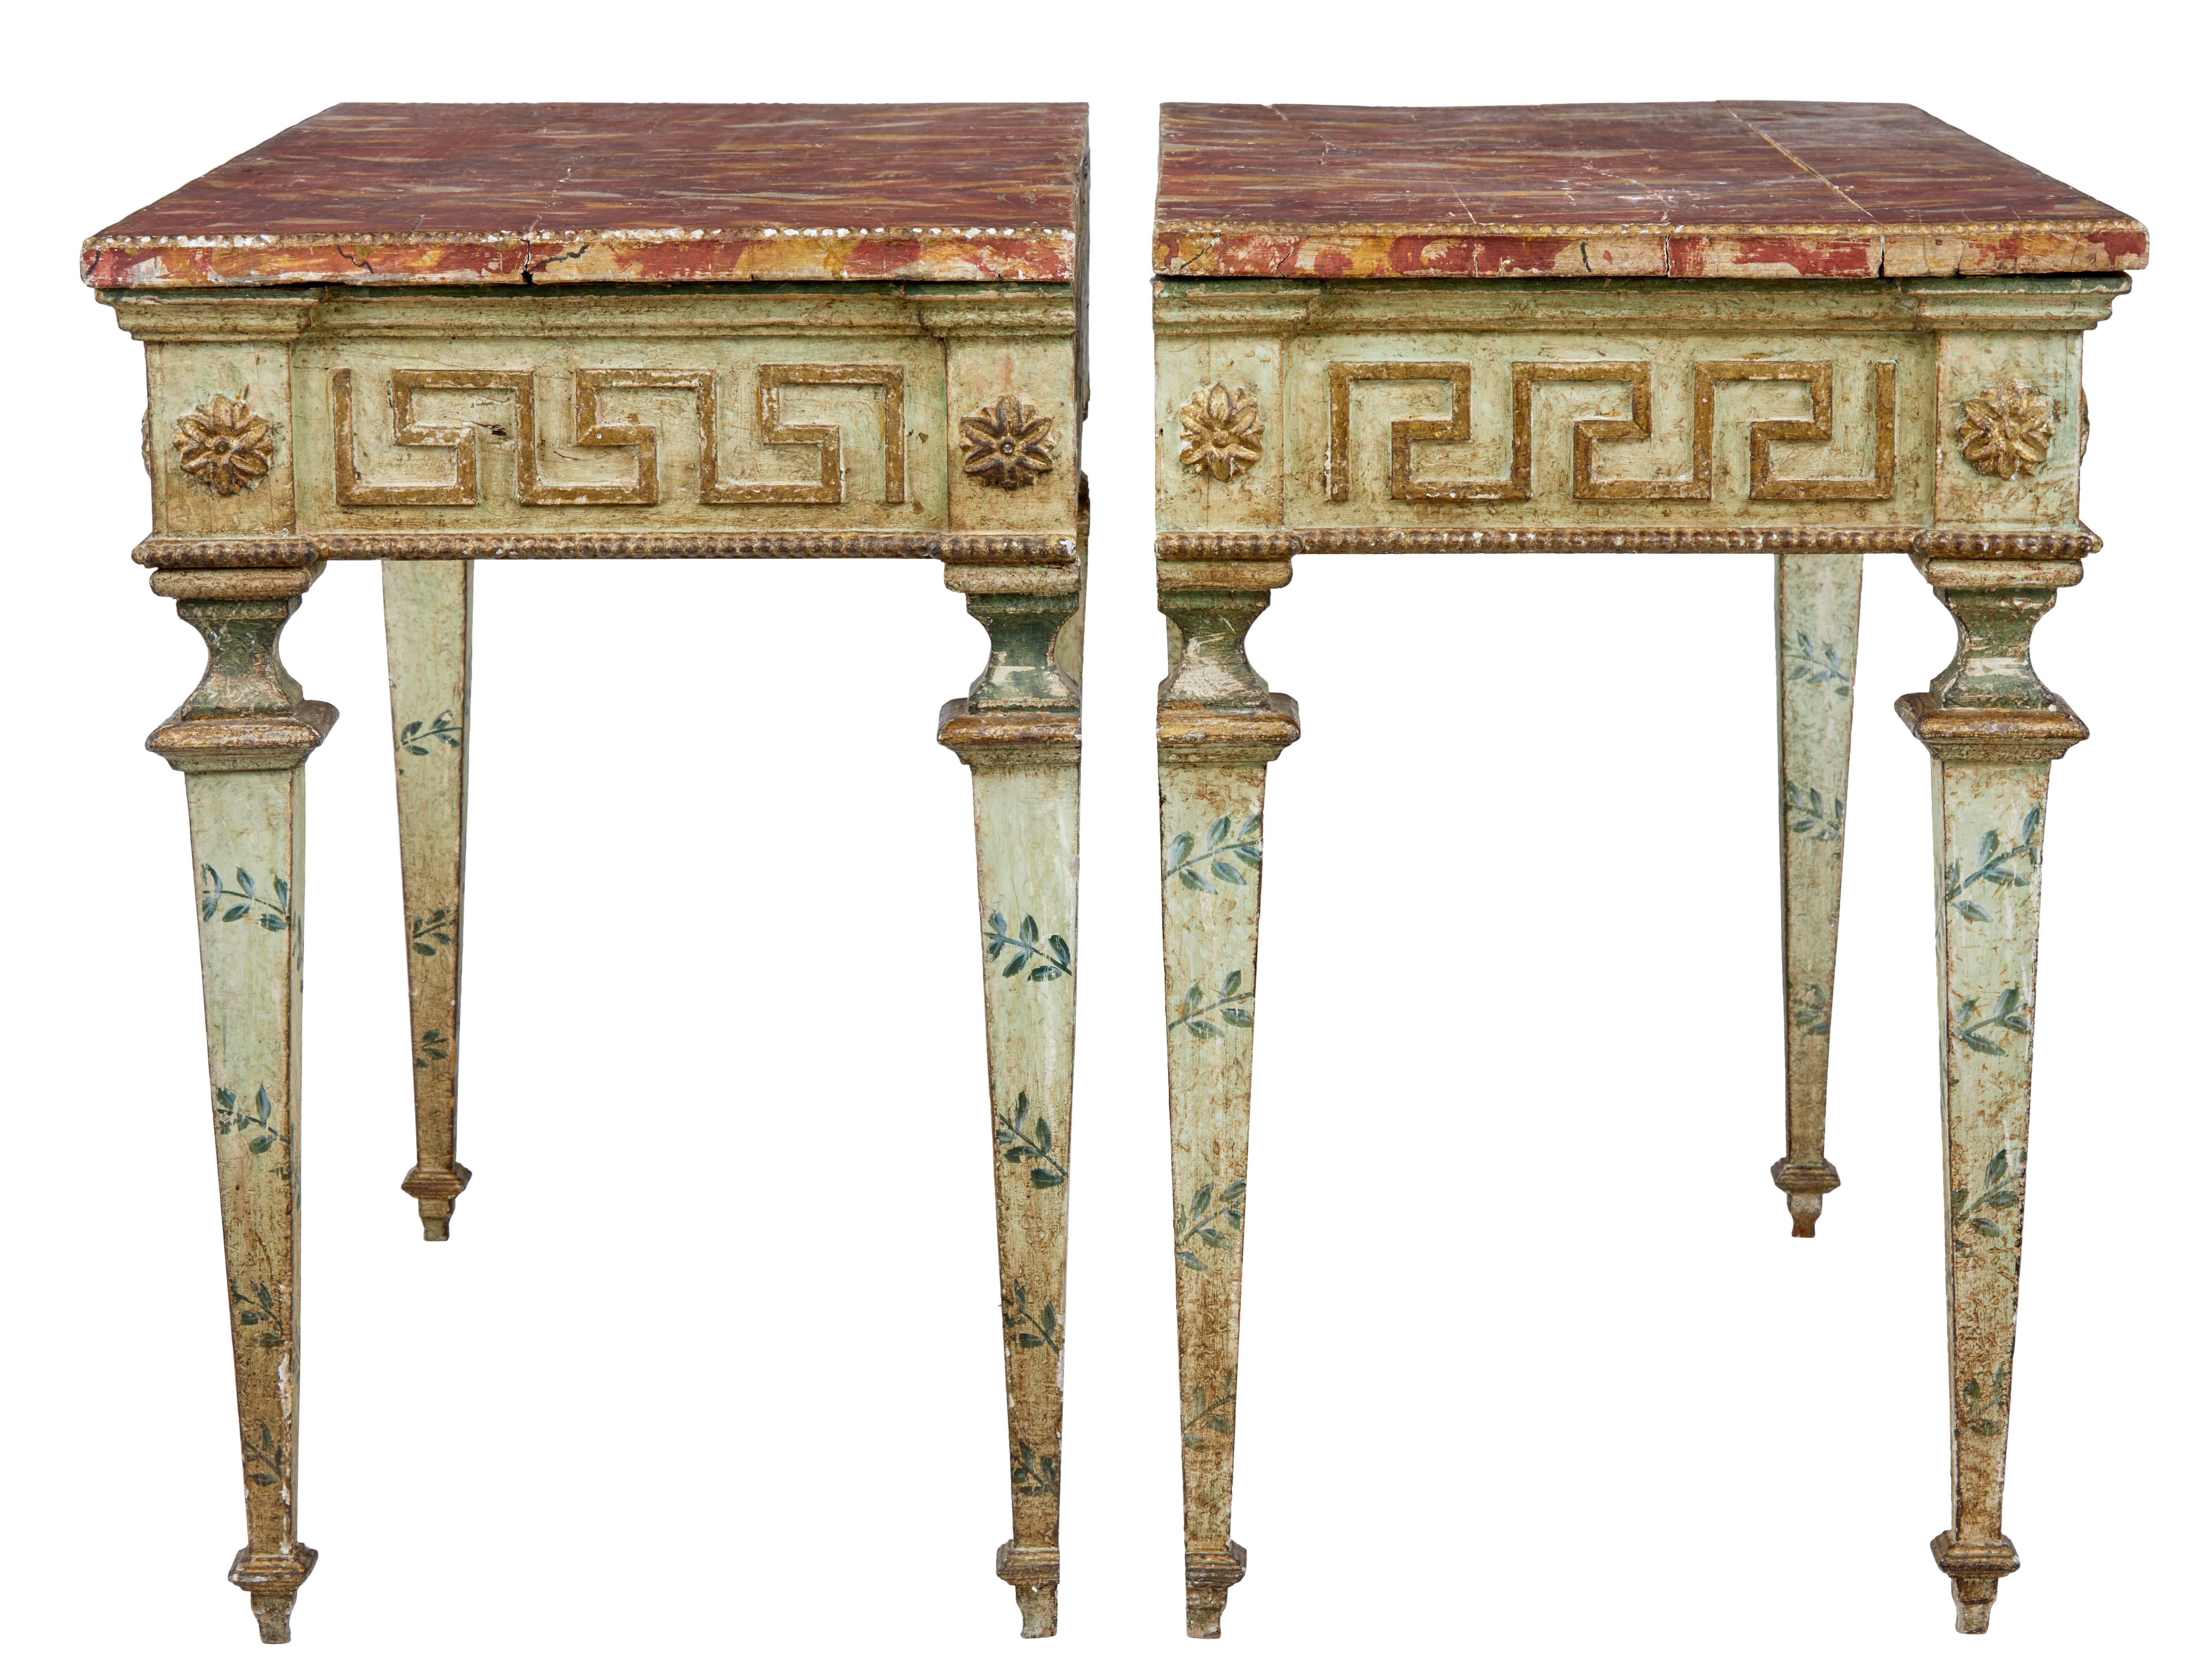 Hand-Painted Rare Pair of 19th Century Painted Italian Console Tables